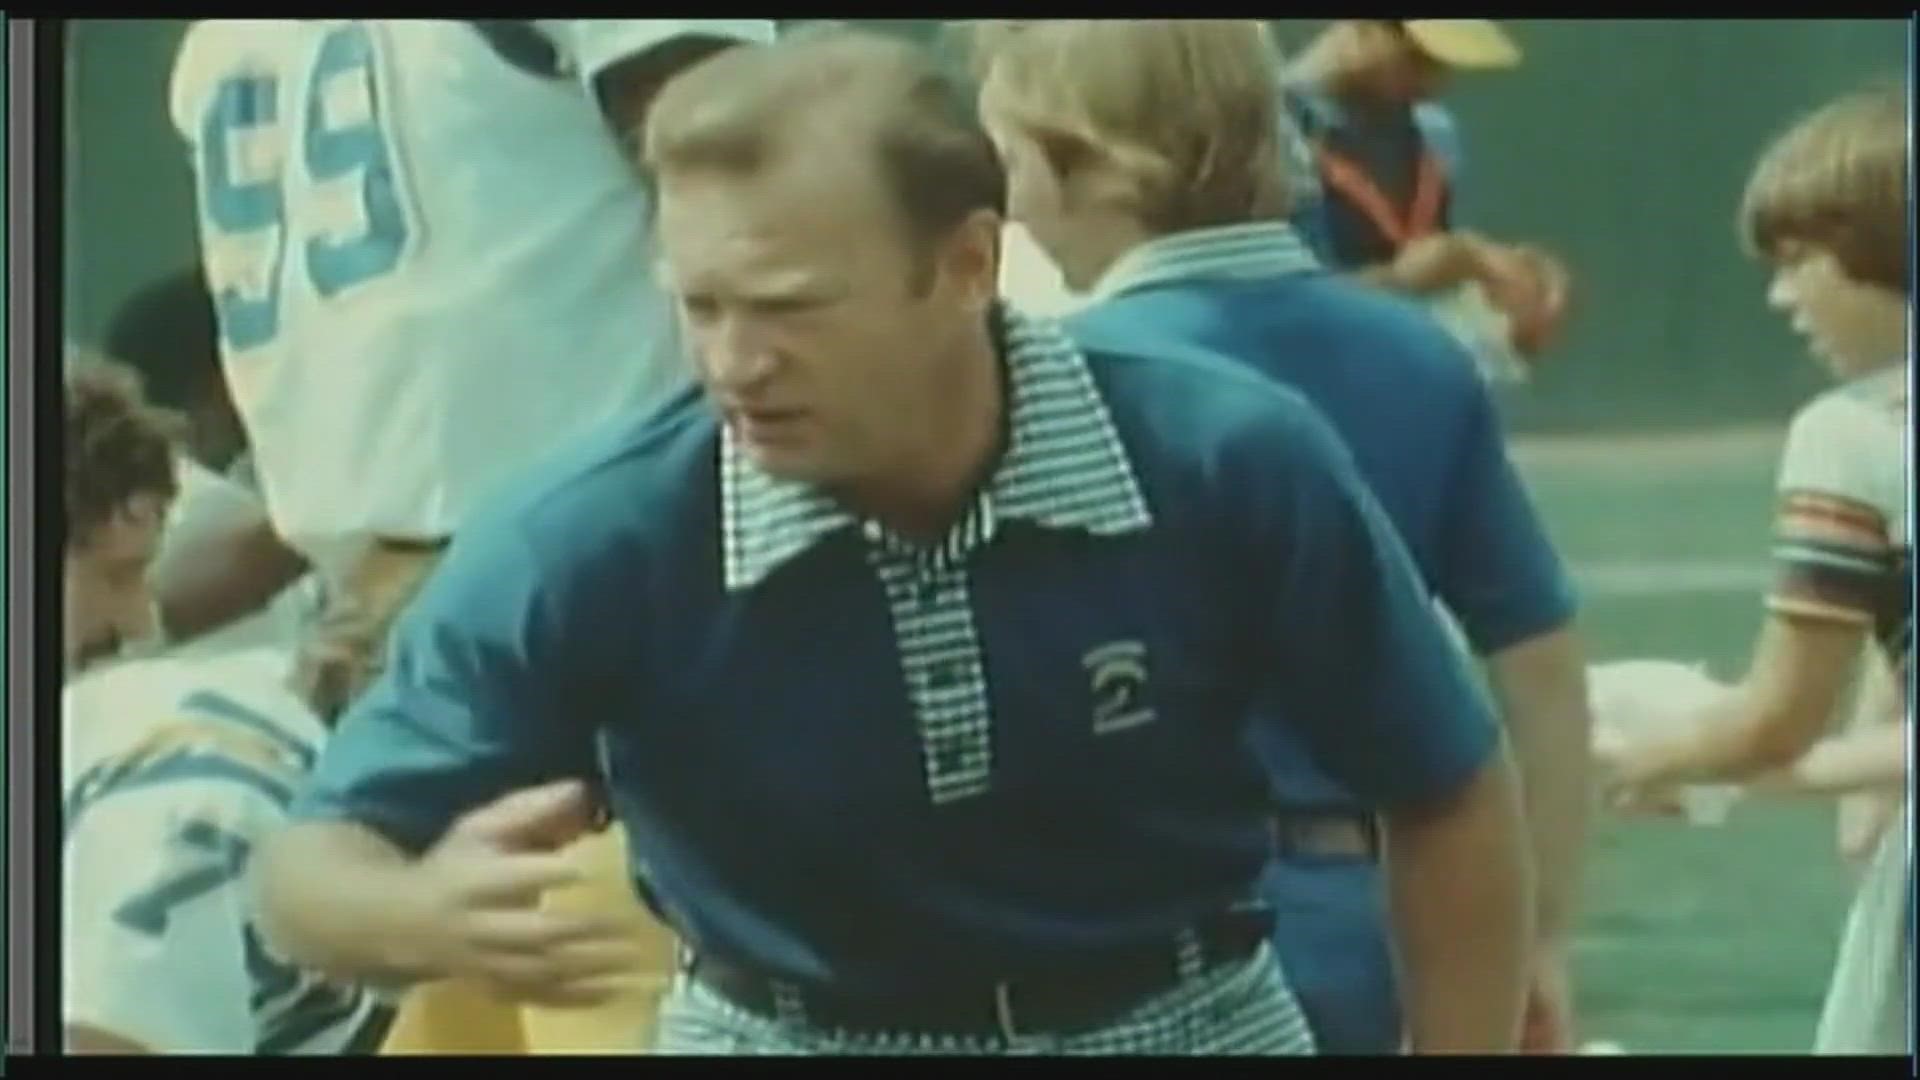 Chargers coach Don Coryell elected Pro Football Hall of Fame 